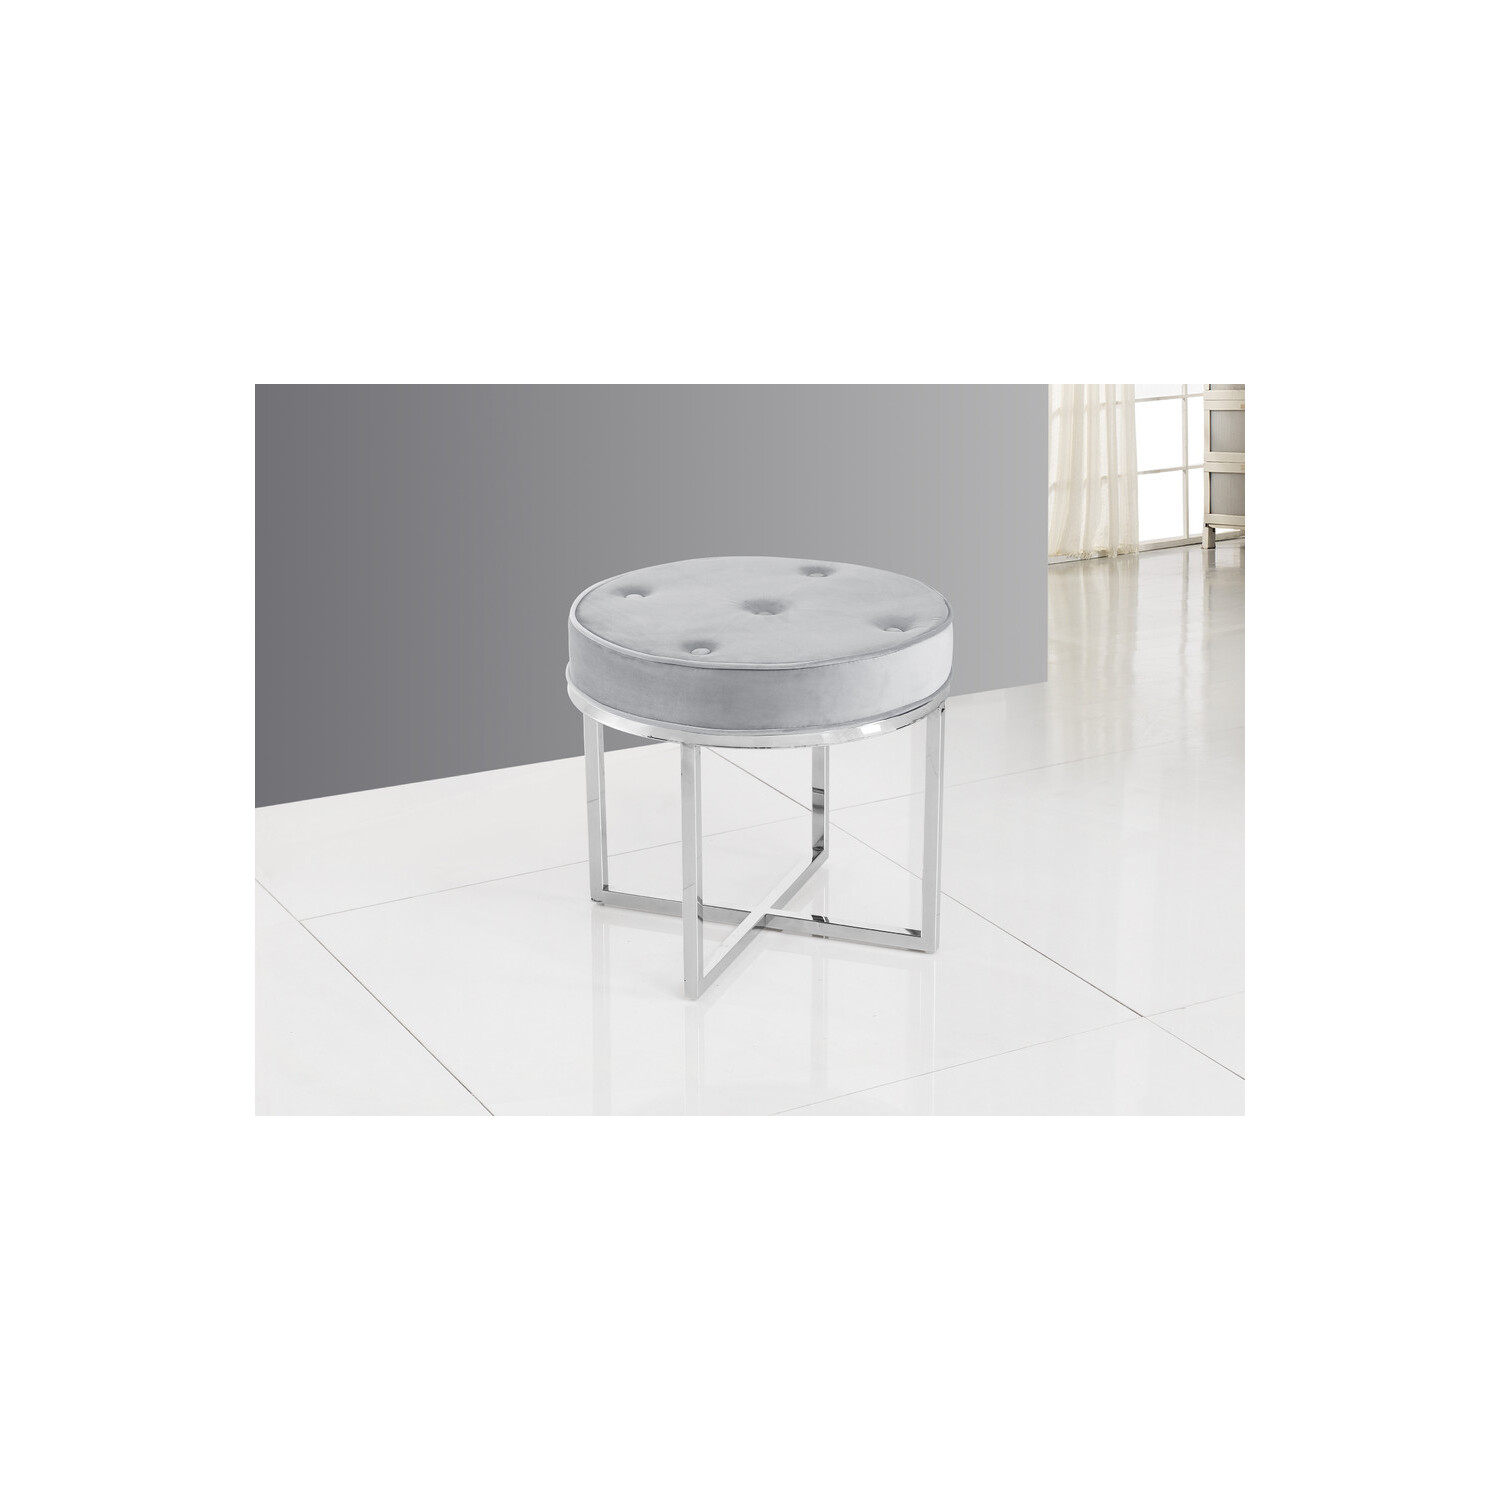 Best Master Furniture E29 Grey Velvet Fabric with Stainless Steel Round Stool - image 2 of 3